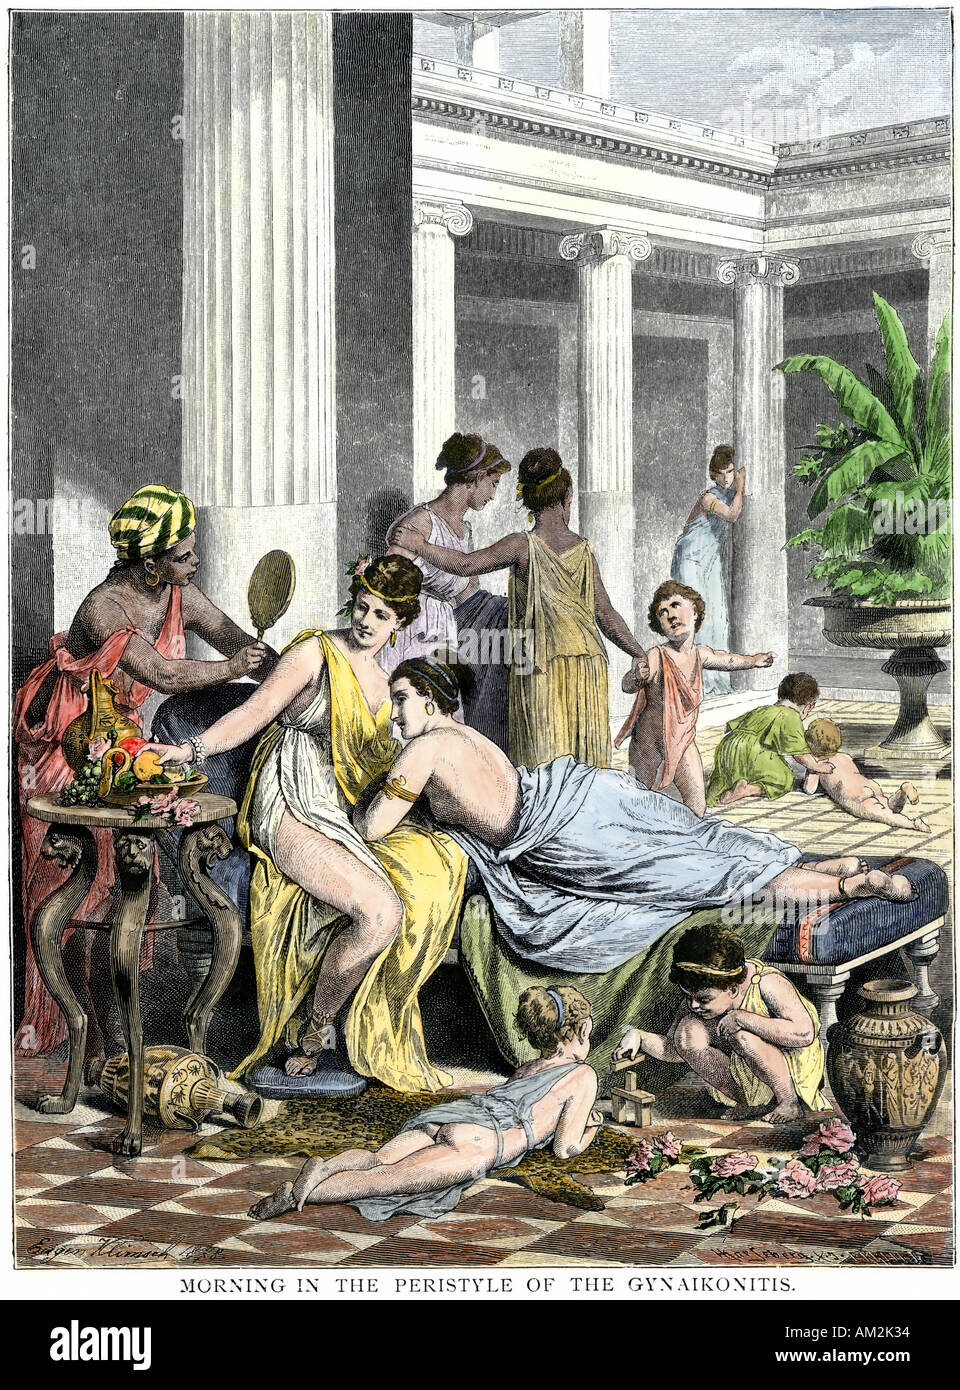 Athens family activities in the peristyle of their home ancient Greece. Hand-colored woodcut Stock Photo